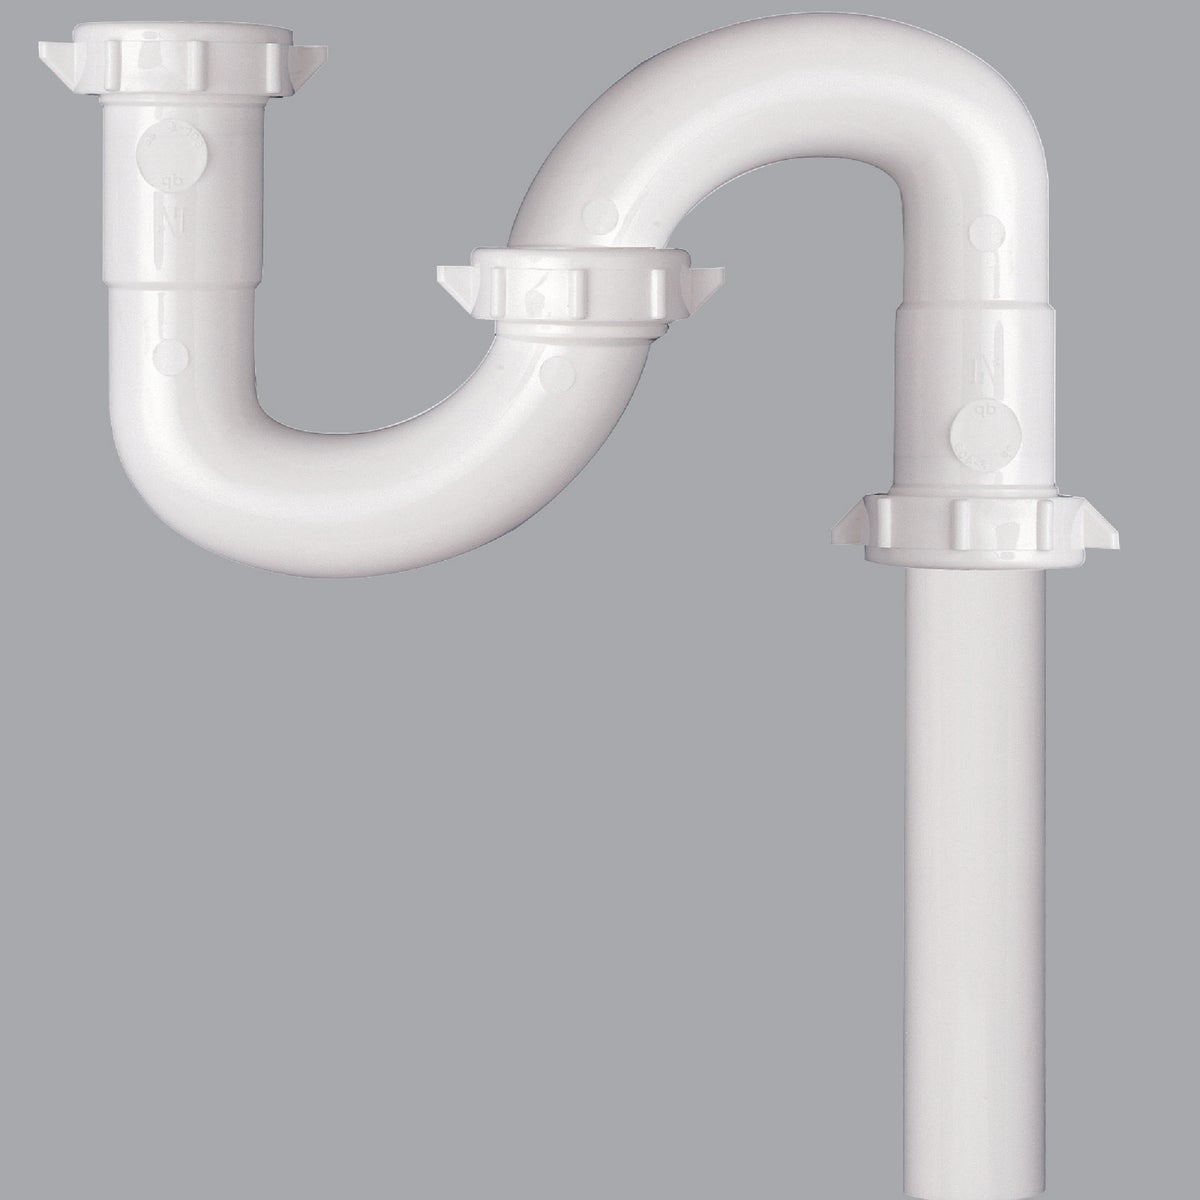 Item 495085, Replacement S-trap for bathroom lavatory drains. White.